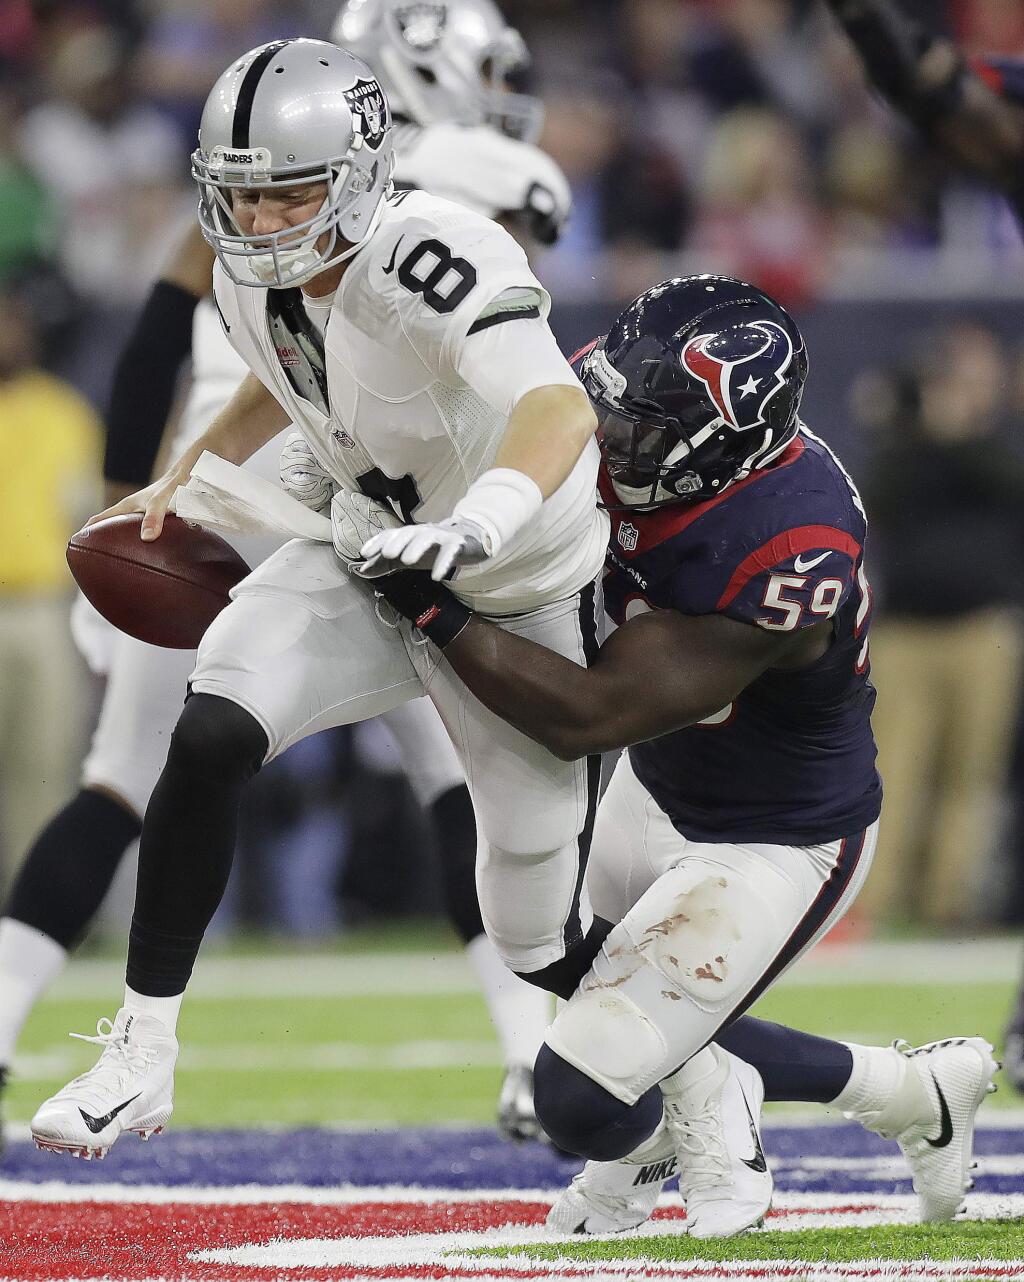 Houston Texans outside linebacker Whitney Mercilus (59) sacks Oakland Raiders quarterback Connor Cook (8) during the second half of an AFC Wild Card NFL football game Saturday, Jan. 7, 2017, in Houston. (AP Photo/Eric Gay)